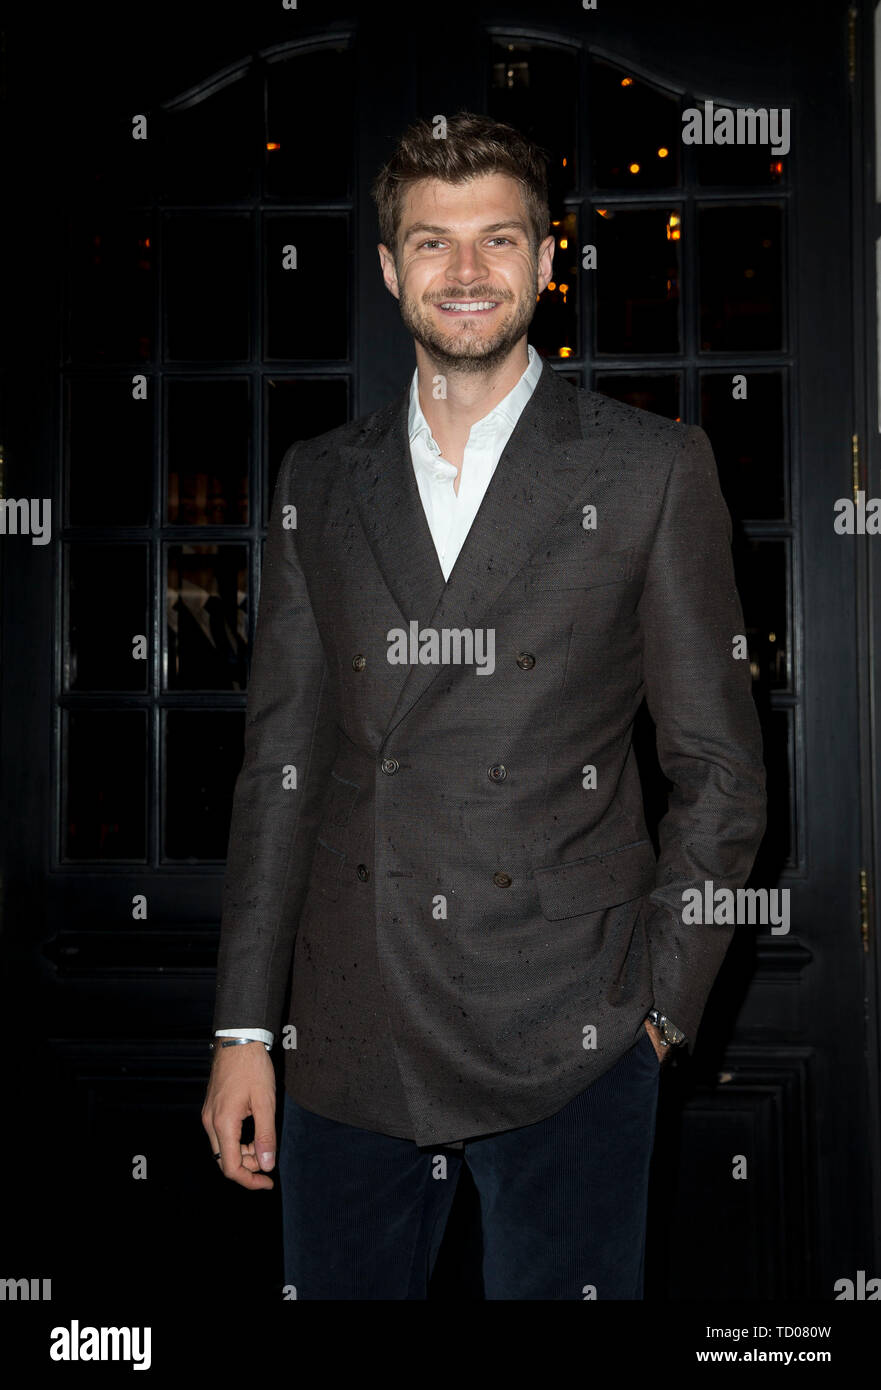 Jim Chapman arrives at Berners Tavern in London for a dinner to celebrate the close of London Fashion Week Men's. Stock Photo